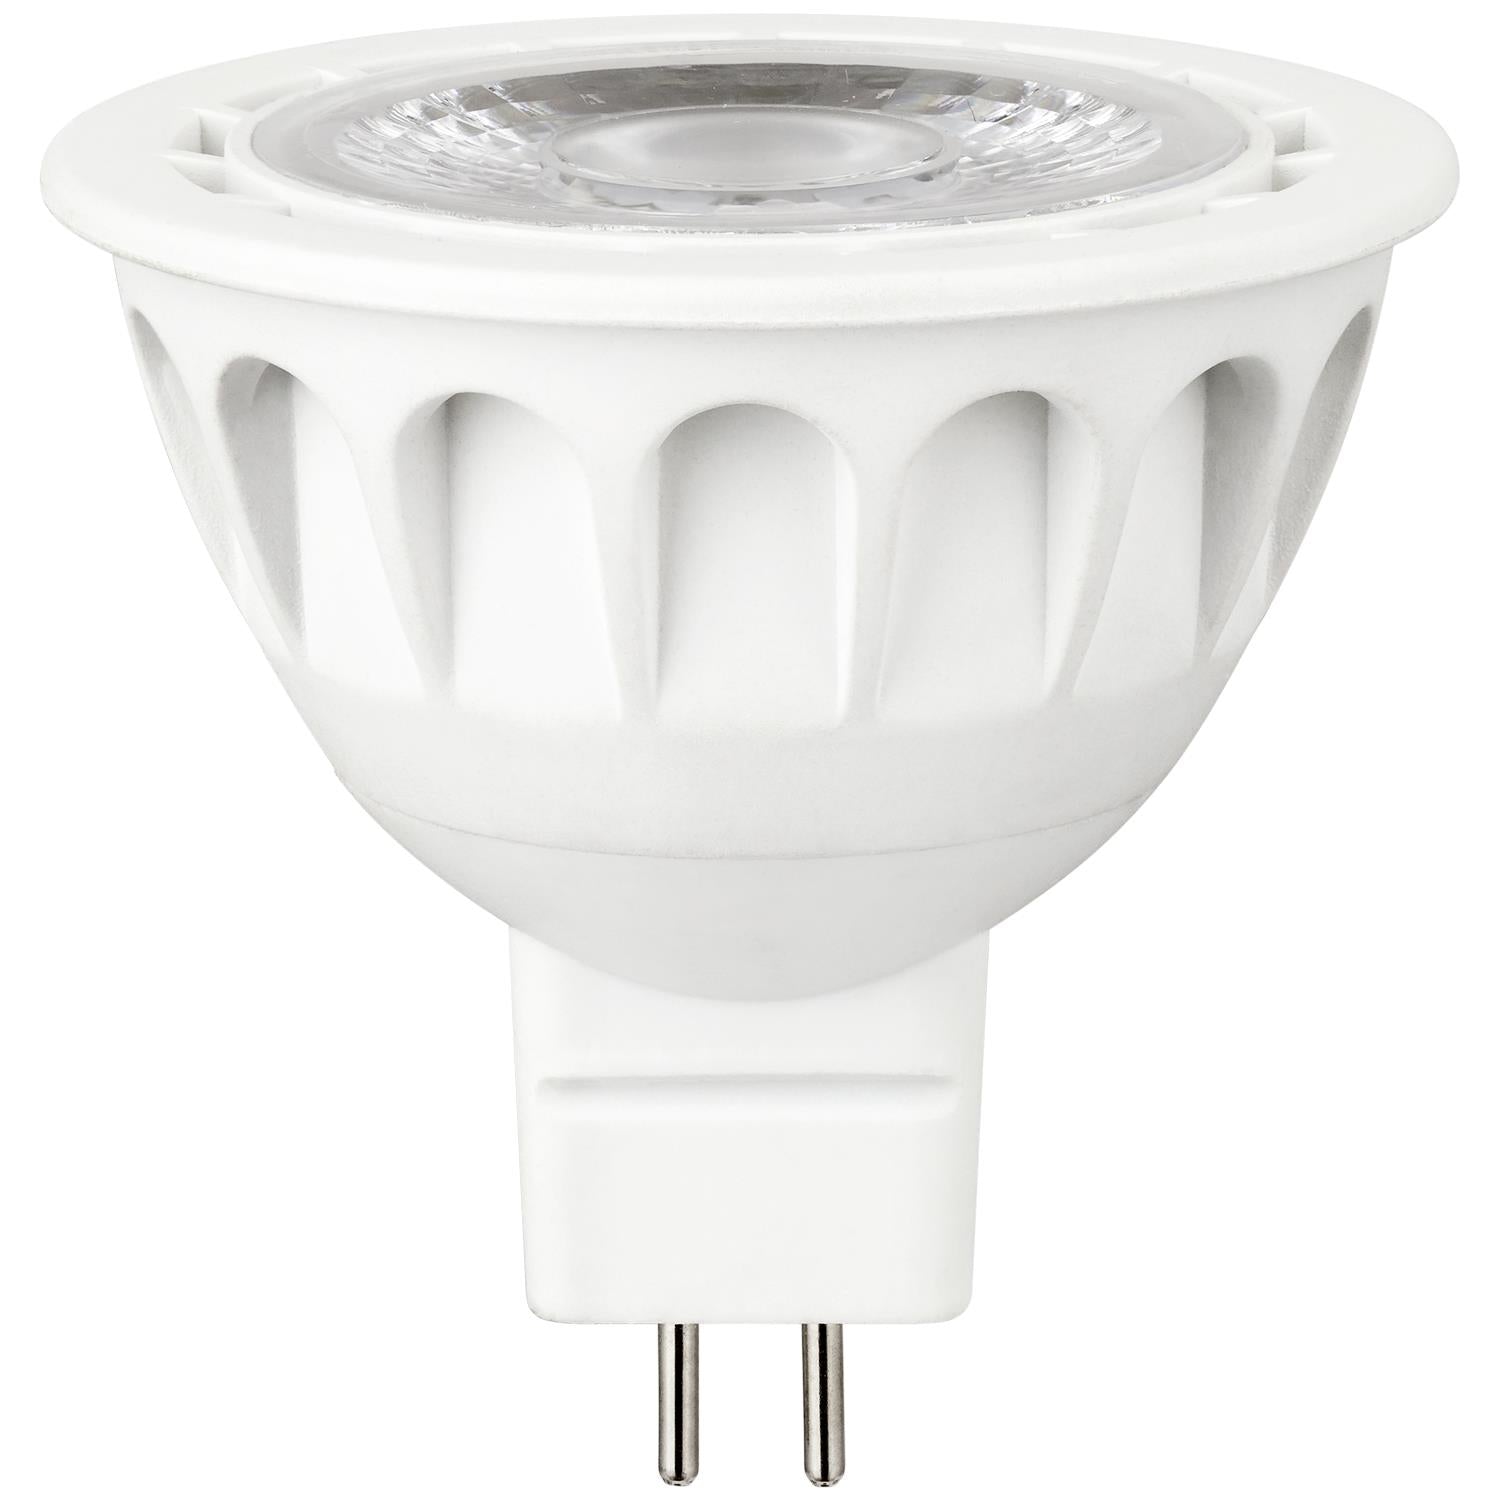 50W Replacement MR16 GU10 Base Dimmable Enhance Reflector LED